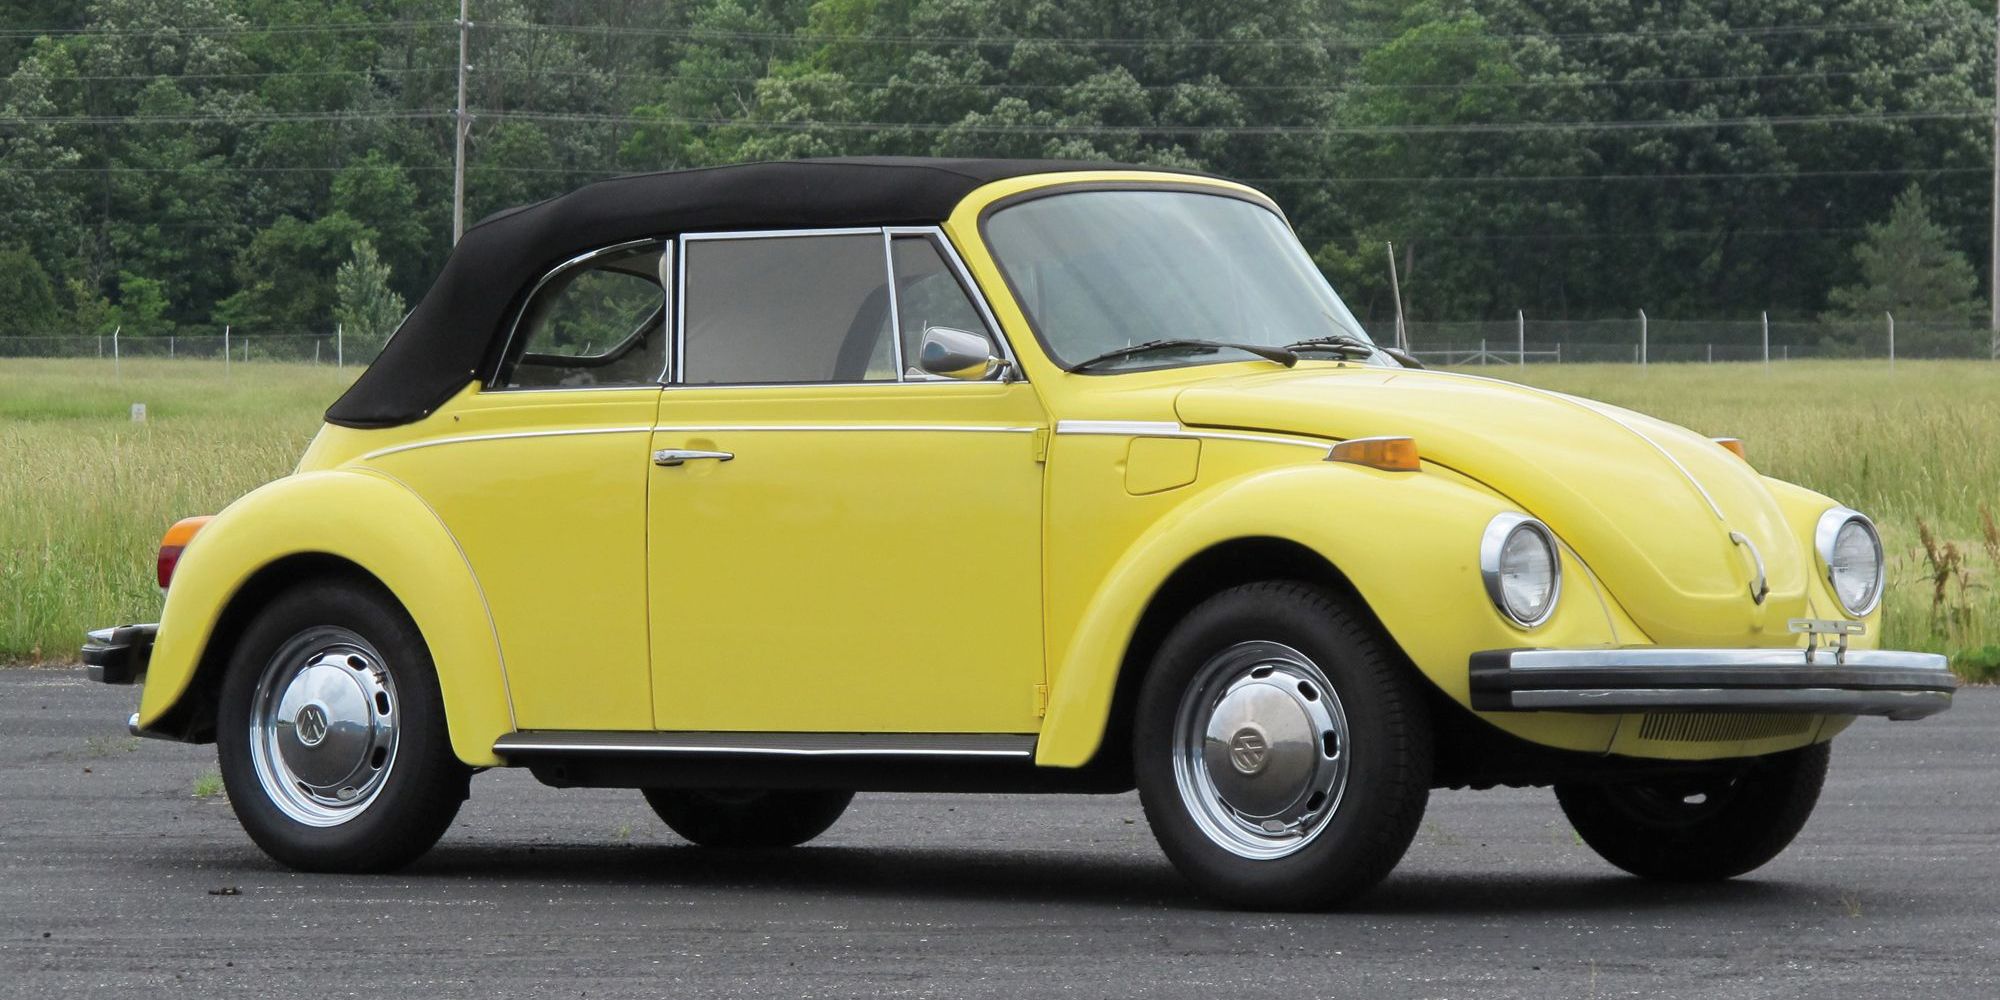 A yellow Beetle Convertible